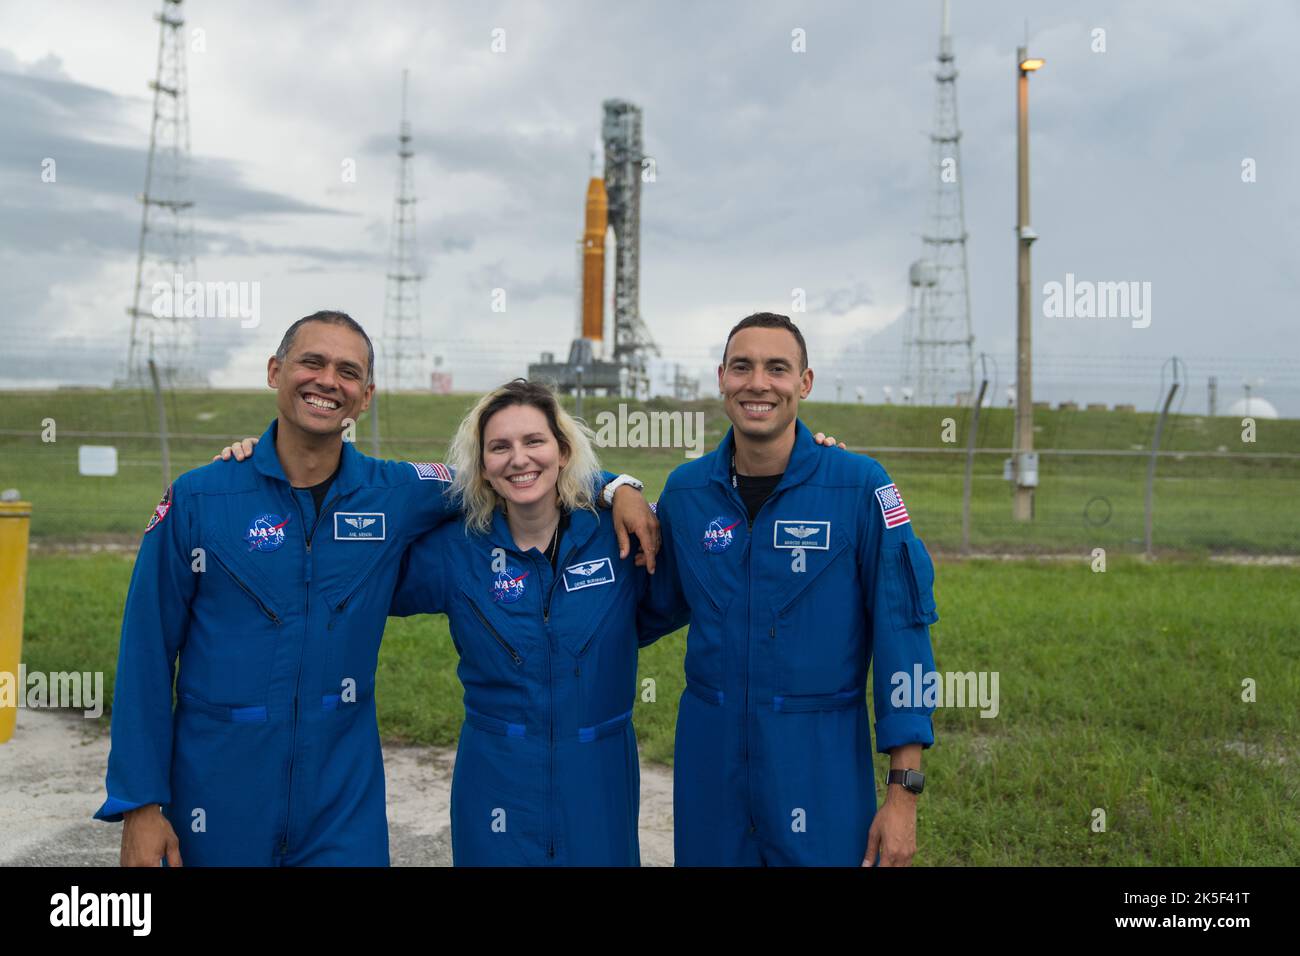 From left to right, NASA astronaut candidates Anil Menon, Deniz Burnham, and Marcos Berrios pose for a photograph in front of NASA’s Artemis I Space Launch System and Orion spacecraft atop the mobile launcher on the pad at Launch Complex 39B at the agency’s Kennedy Space Center in Florida on Sept. 2, 2022. The first in a series of increasingly complex missions, Artemis I will provide a foundation for human deep space exploration and demonstrate our commitment and capability to extend human presence to the Moon and beyond. The primary goal of Artemis I is to thoroughly test the integrated syste Stock Photo